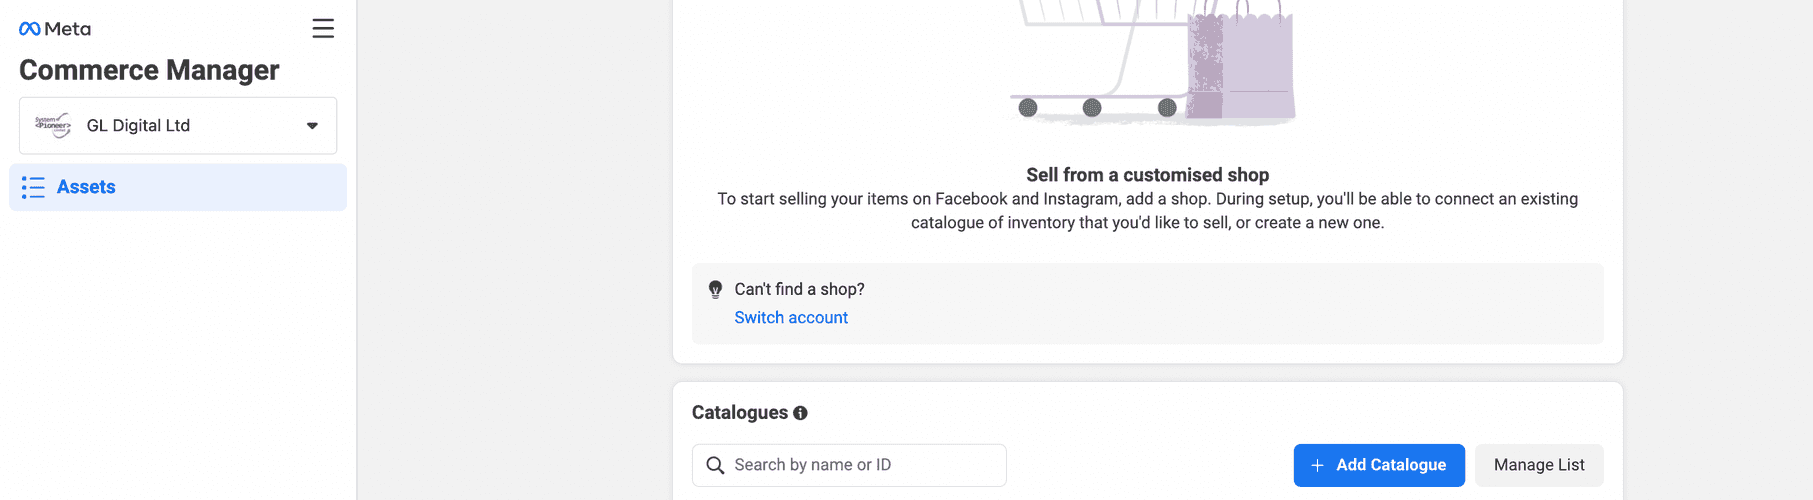 A screenshot of the add catalogue button in the Facebook commerce manager